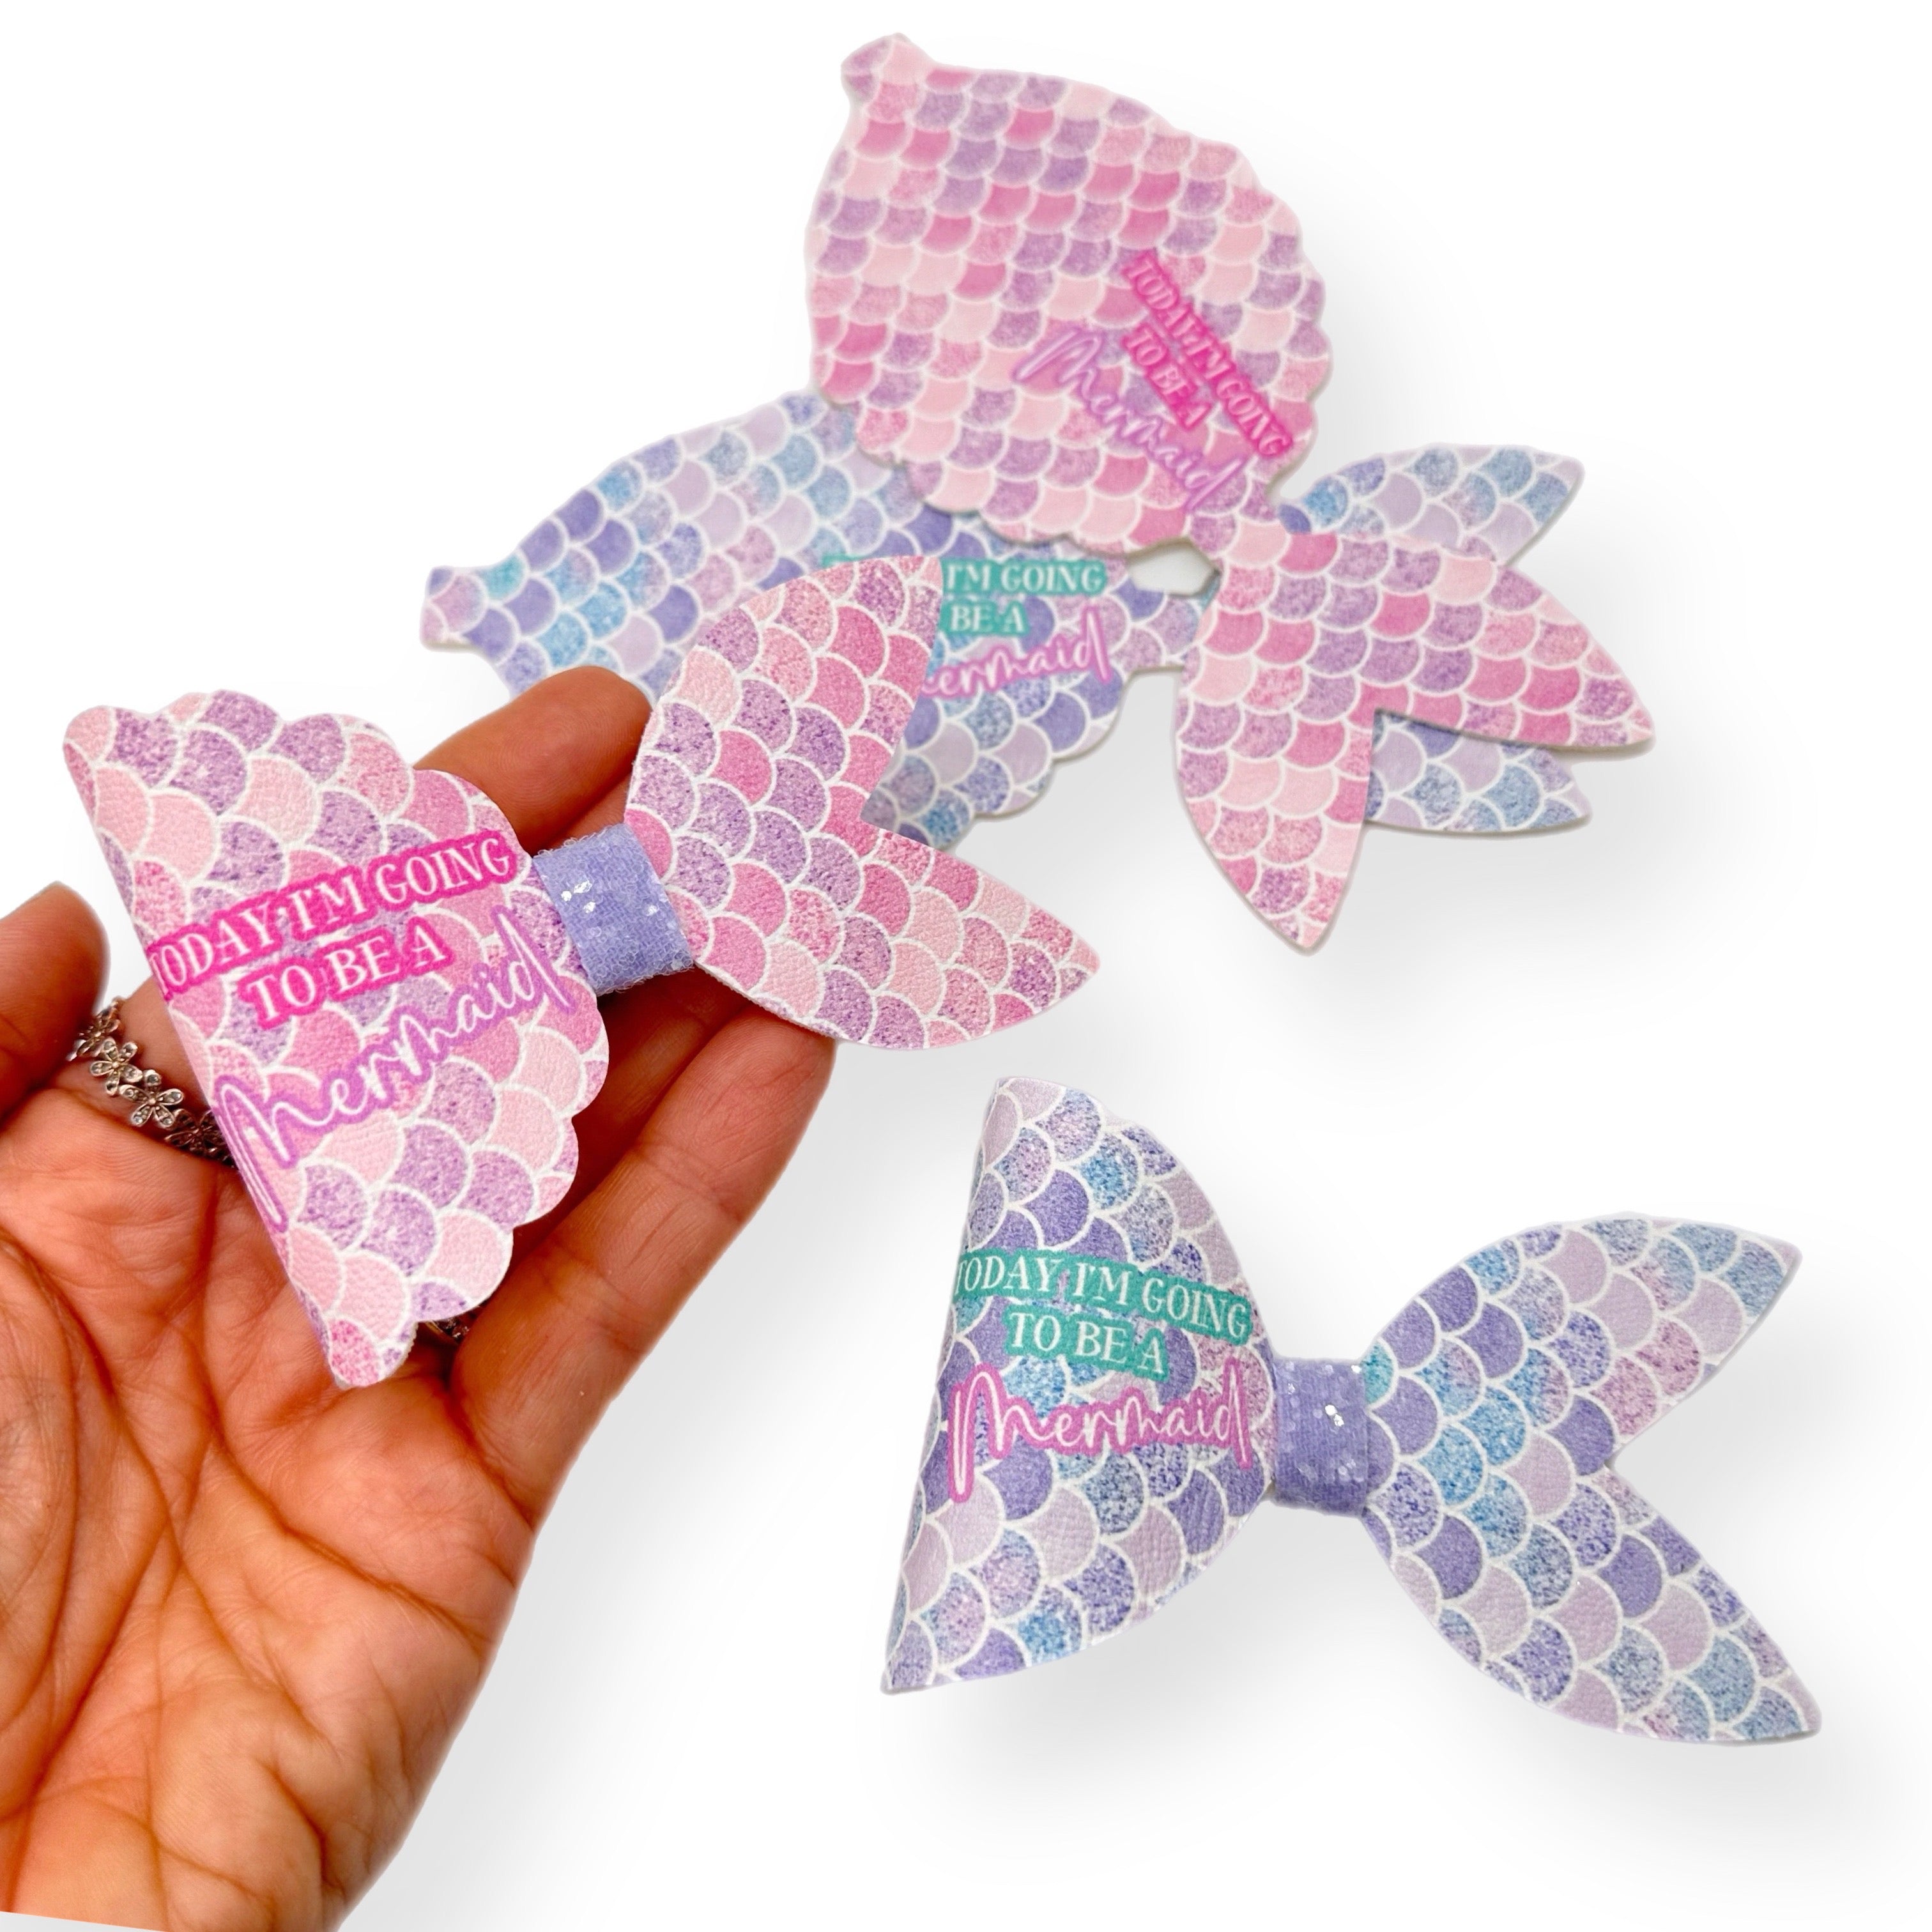 Today I'm going to be a Mermaid Bow 3.5” | Pre Cut DIY Hair Bow Loops